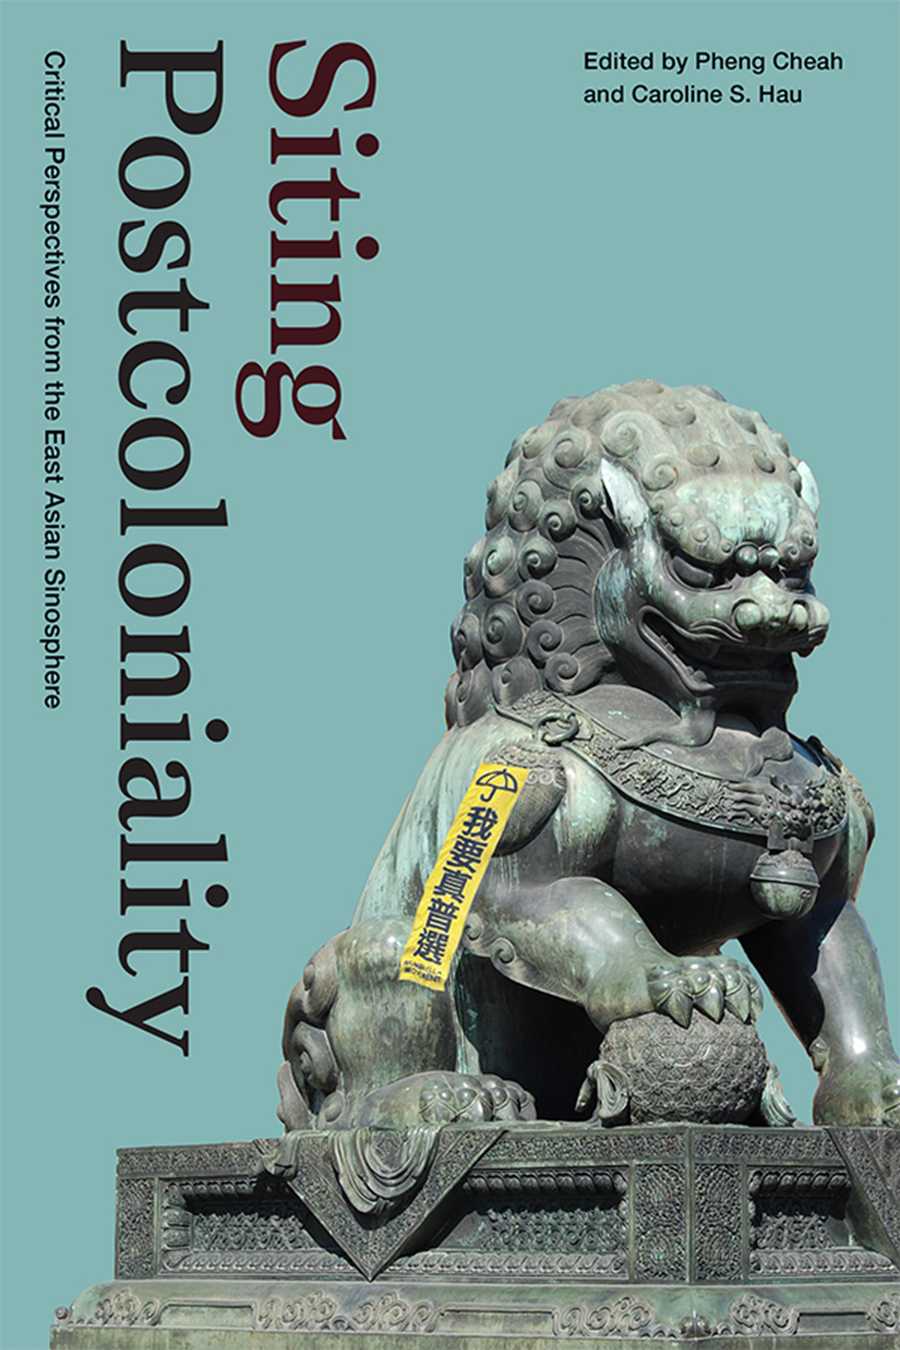 Siting Postcoloniality: Critical Perspectives from the East Asian Sinosphere